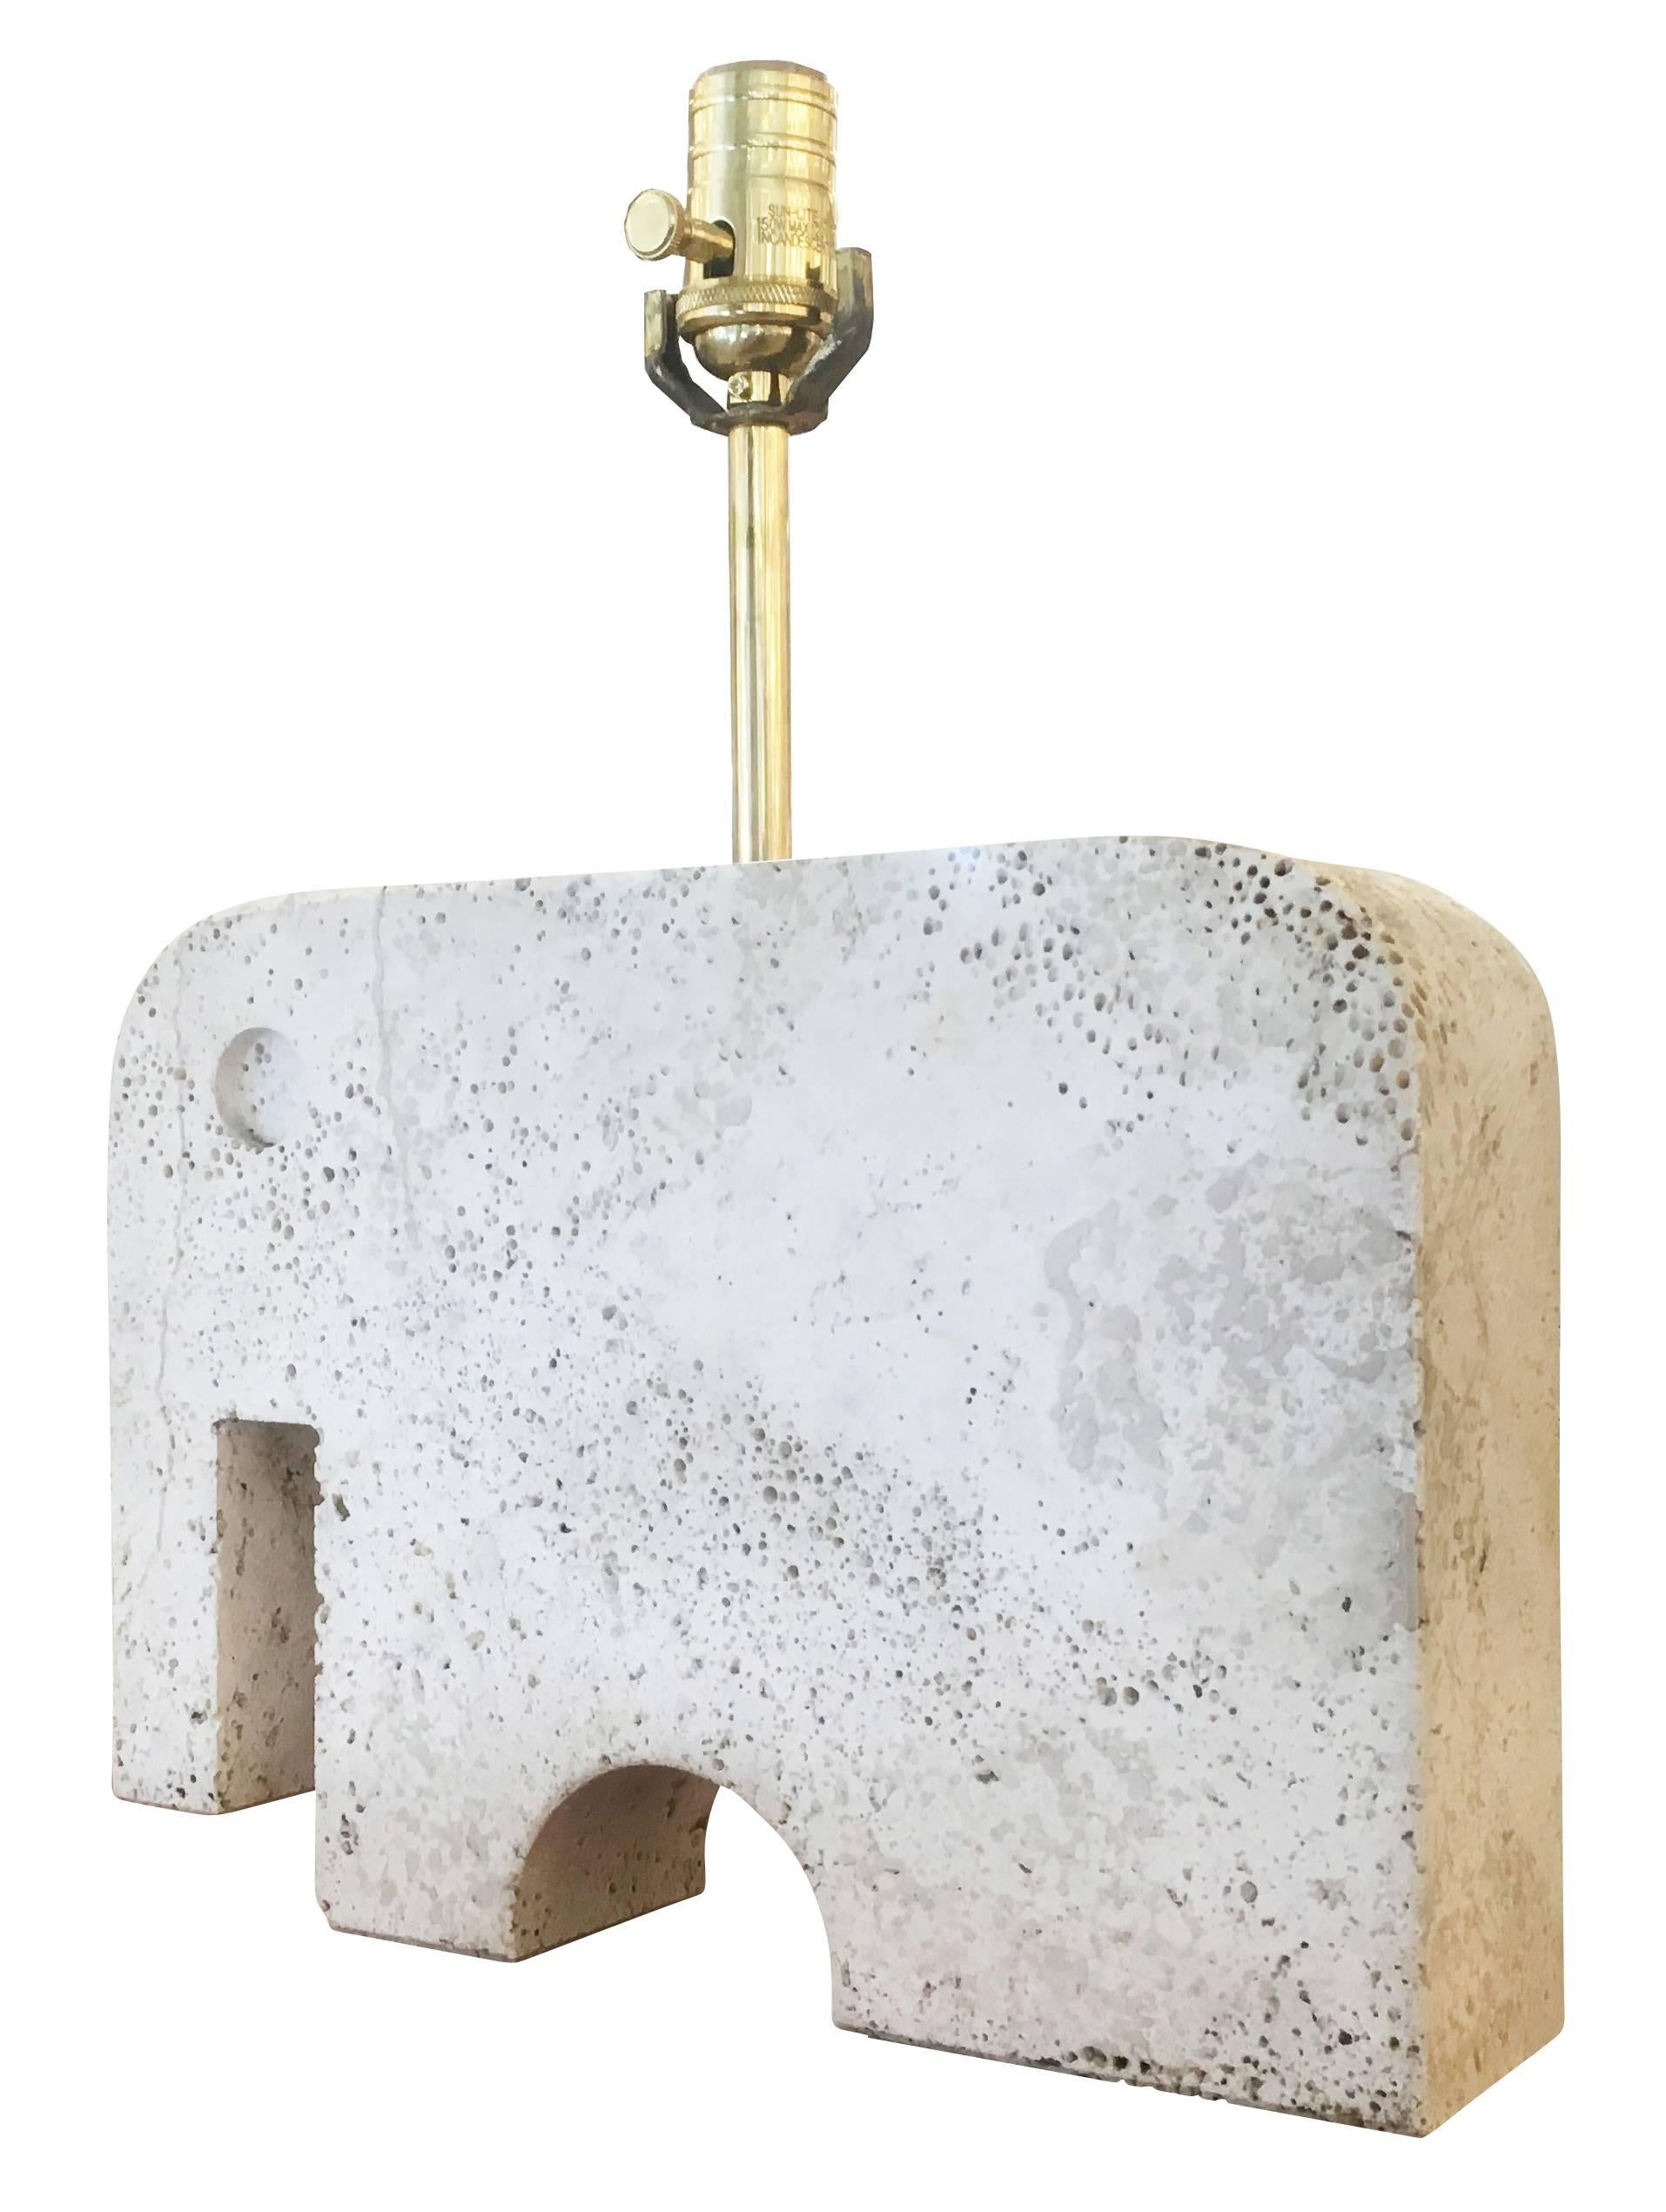 Playful travertine table lamp from the 1950s in the shape of an elephant.

Condition: Excellent vintage condition, minor wear consistent with age and use

Measures: Width 13.75”

Depth 3”

Height 17” (top of socket)
